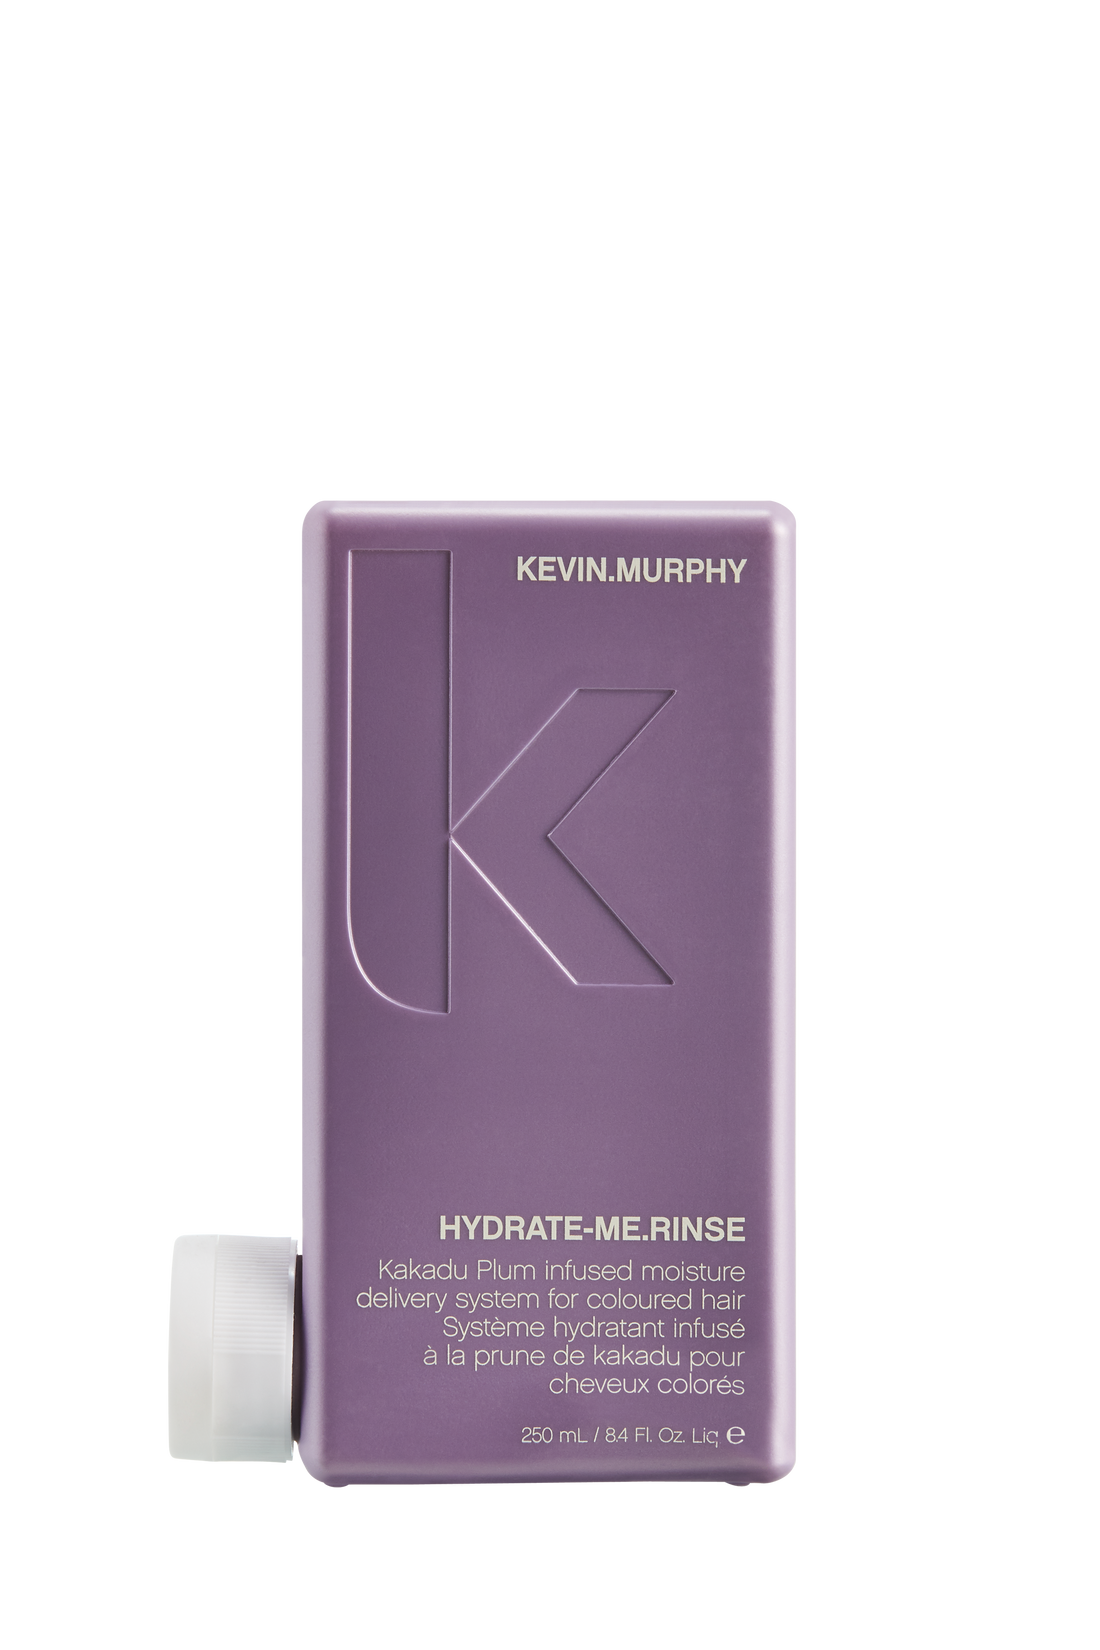 KEVIN MURPHY HYDRATE-ME RINSE 250ml